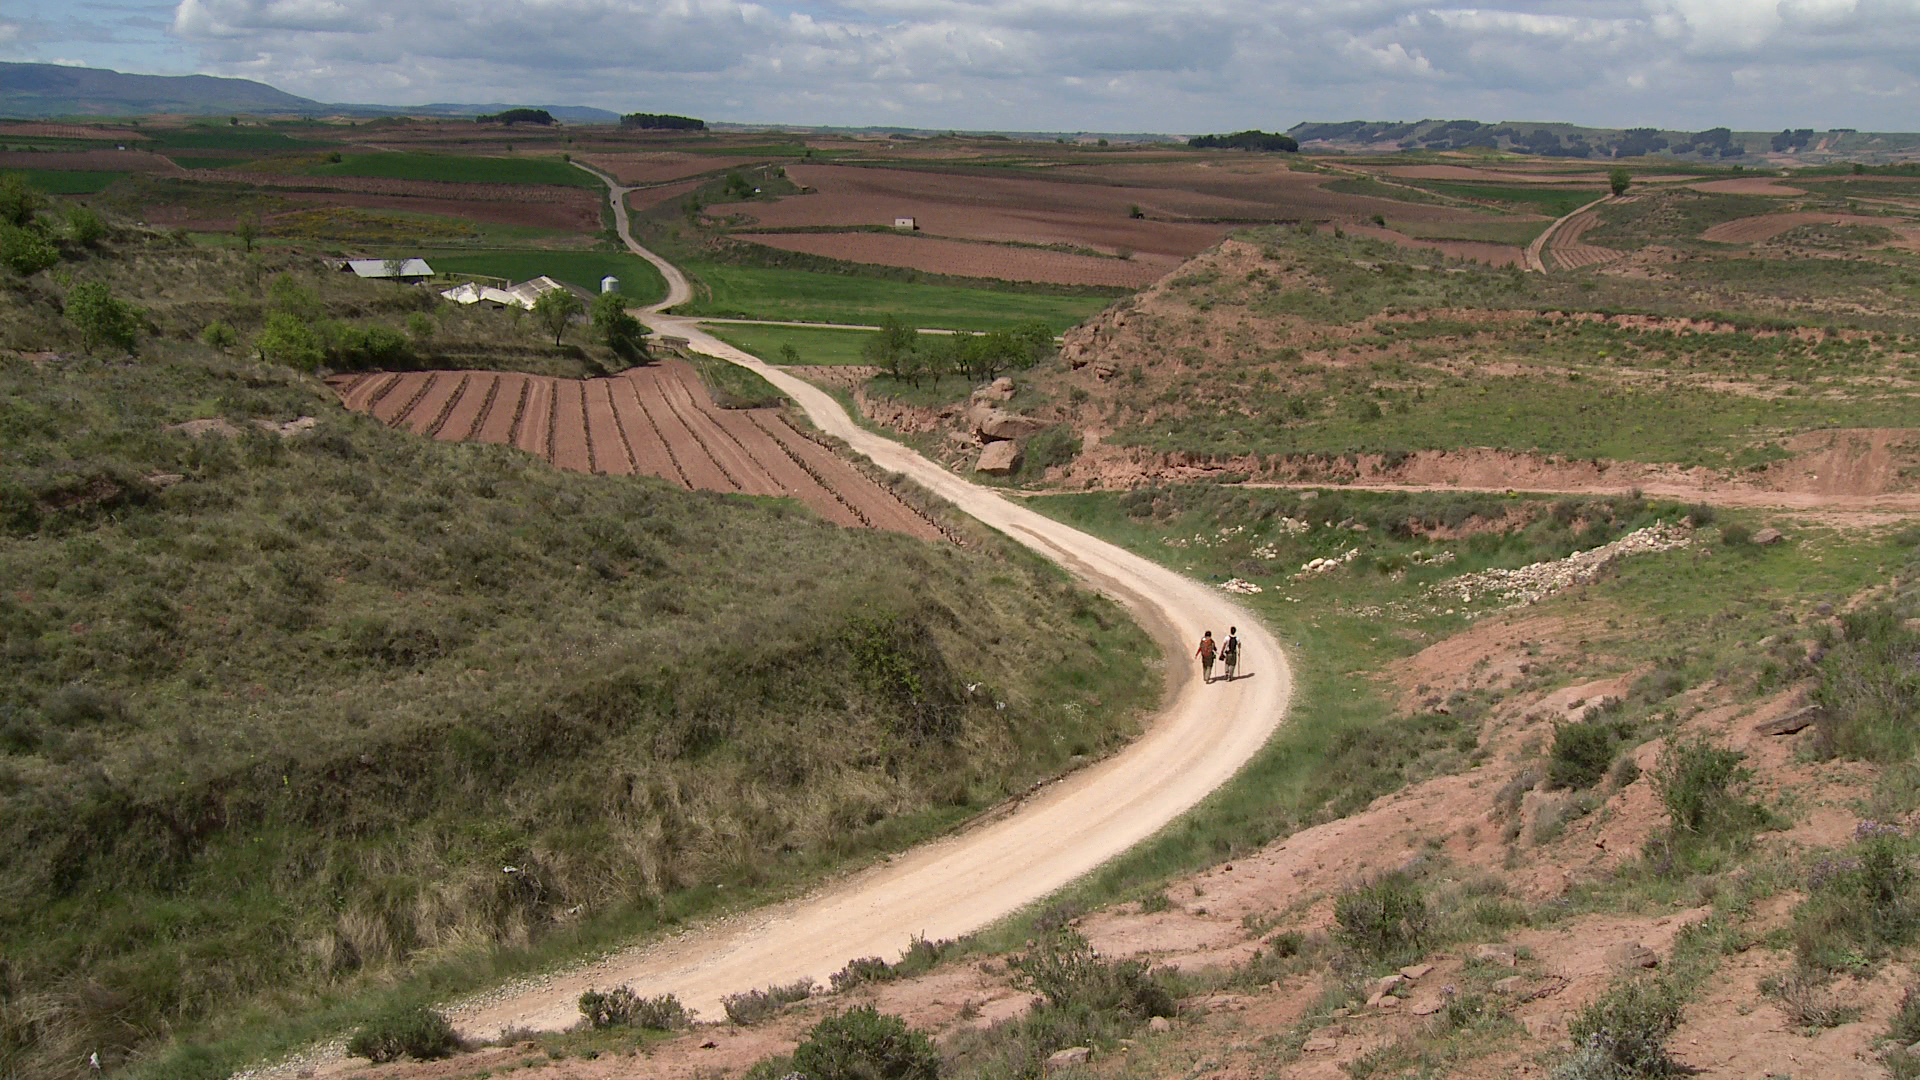 The modern-day pilgrims on their ancient path.caminodocumentary.org